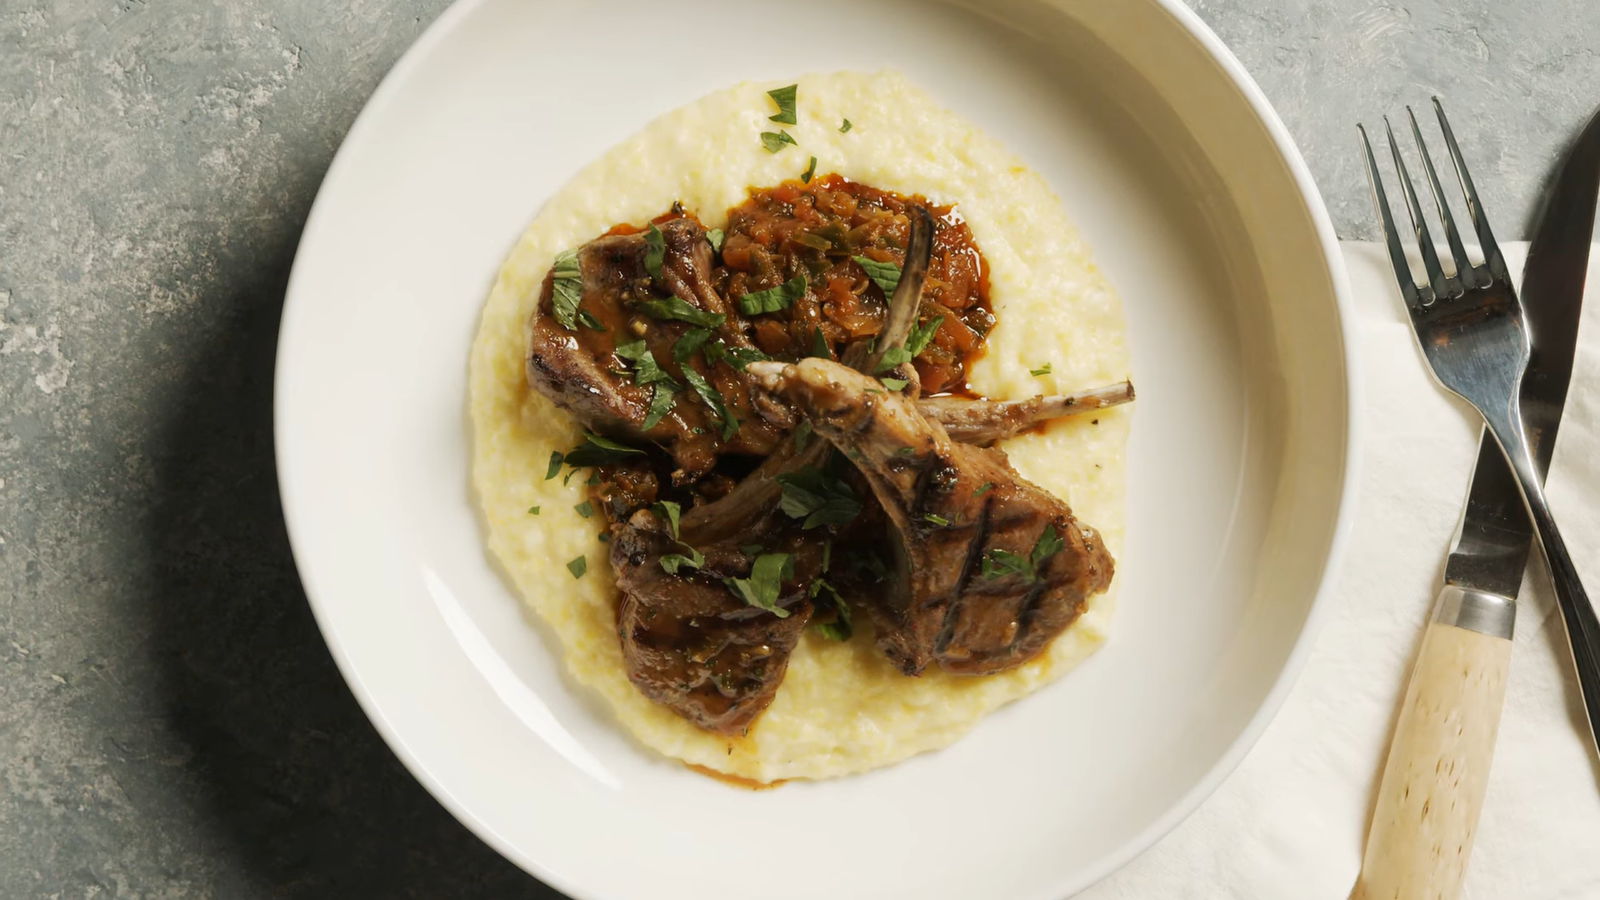 Grilled Lamb Chops with Watermelon Molasses, Sofrito and Polenta